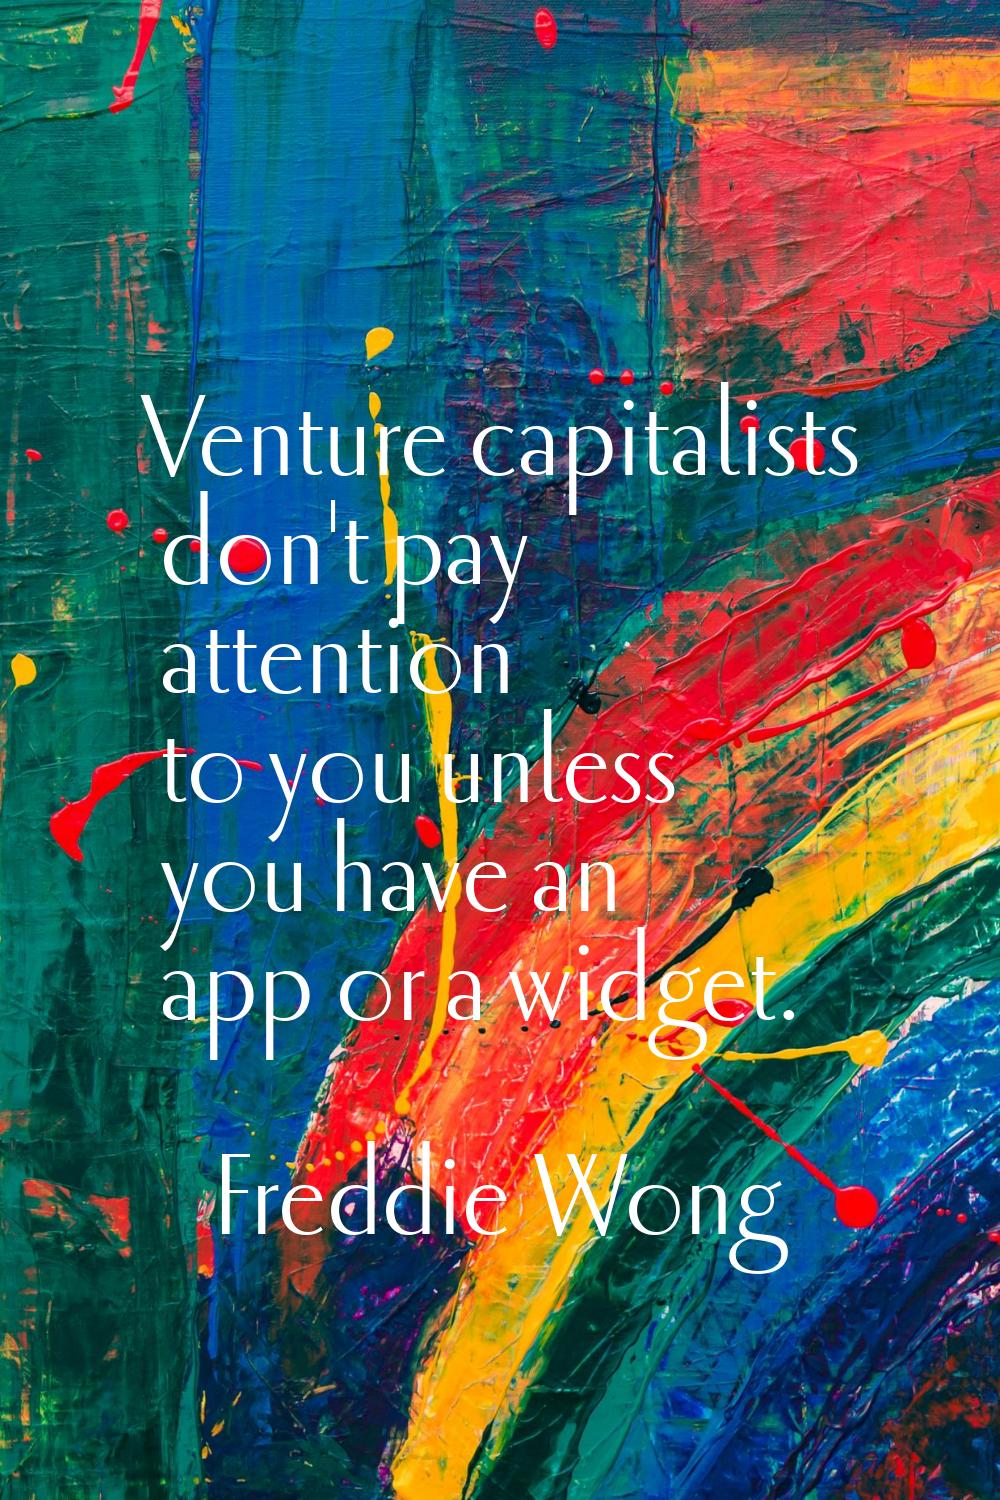 Venture capitalists don't pay attention to you unless you have an app or a widget.